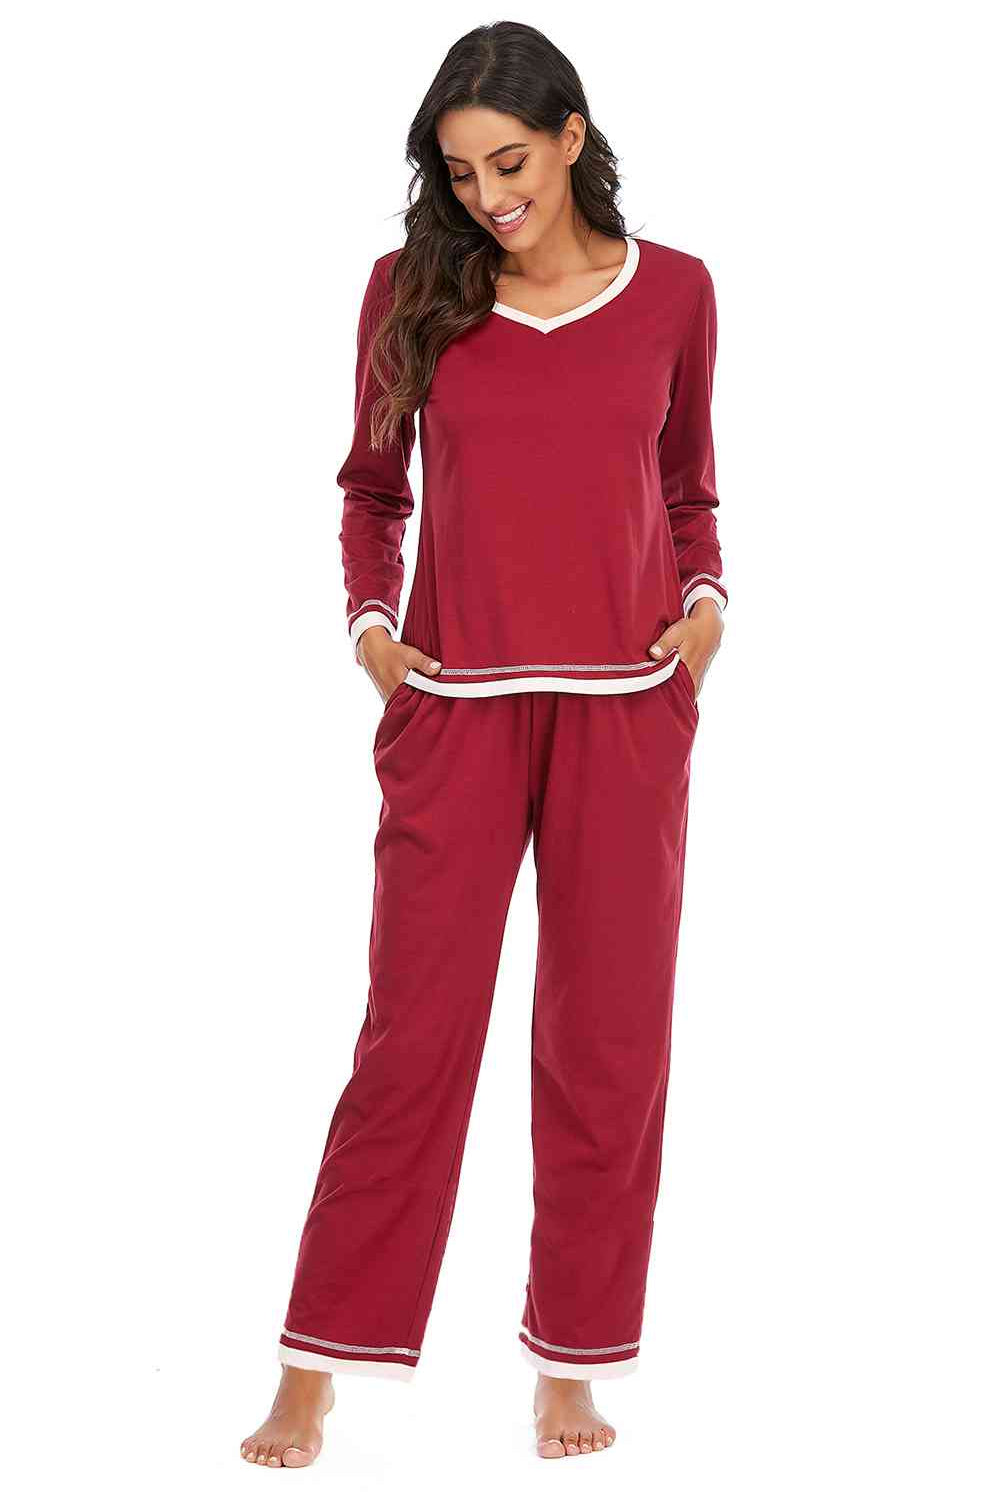 Brown V-Neck Top and Pants Lounge Set Loungewear